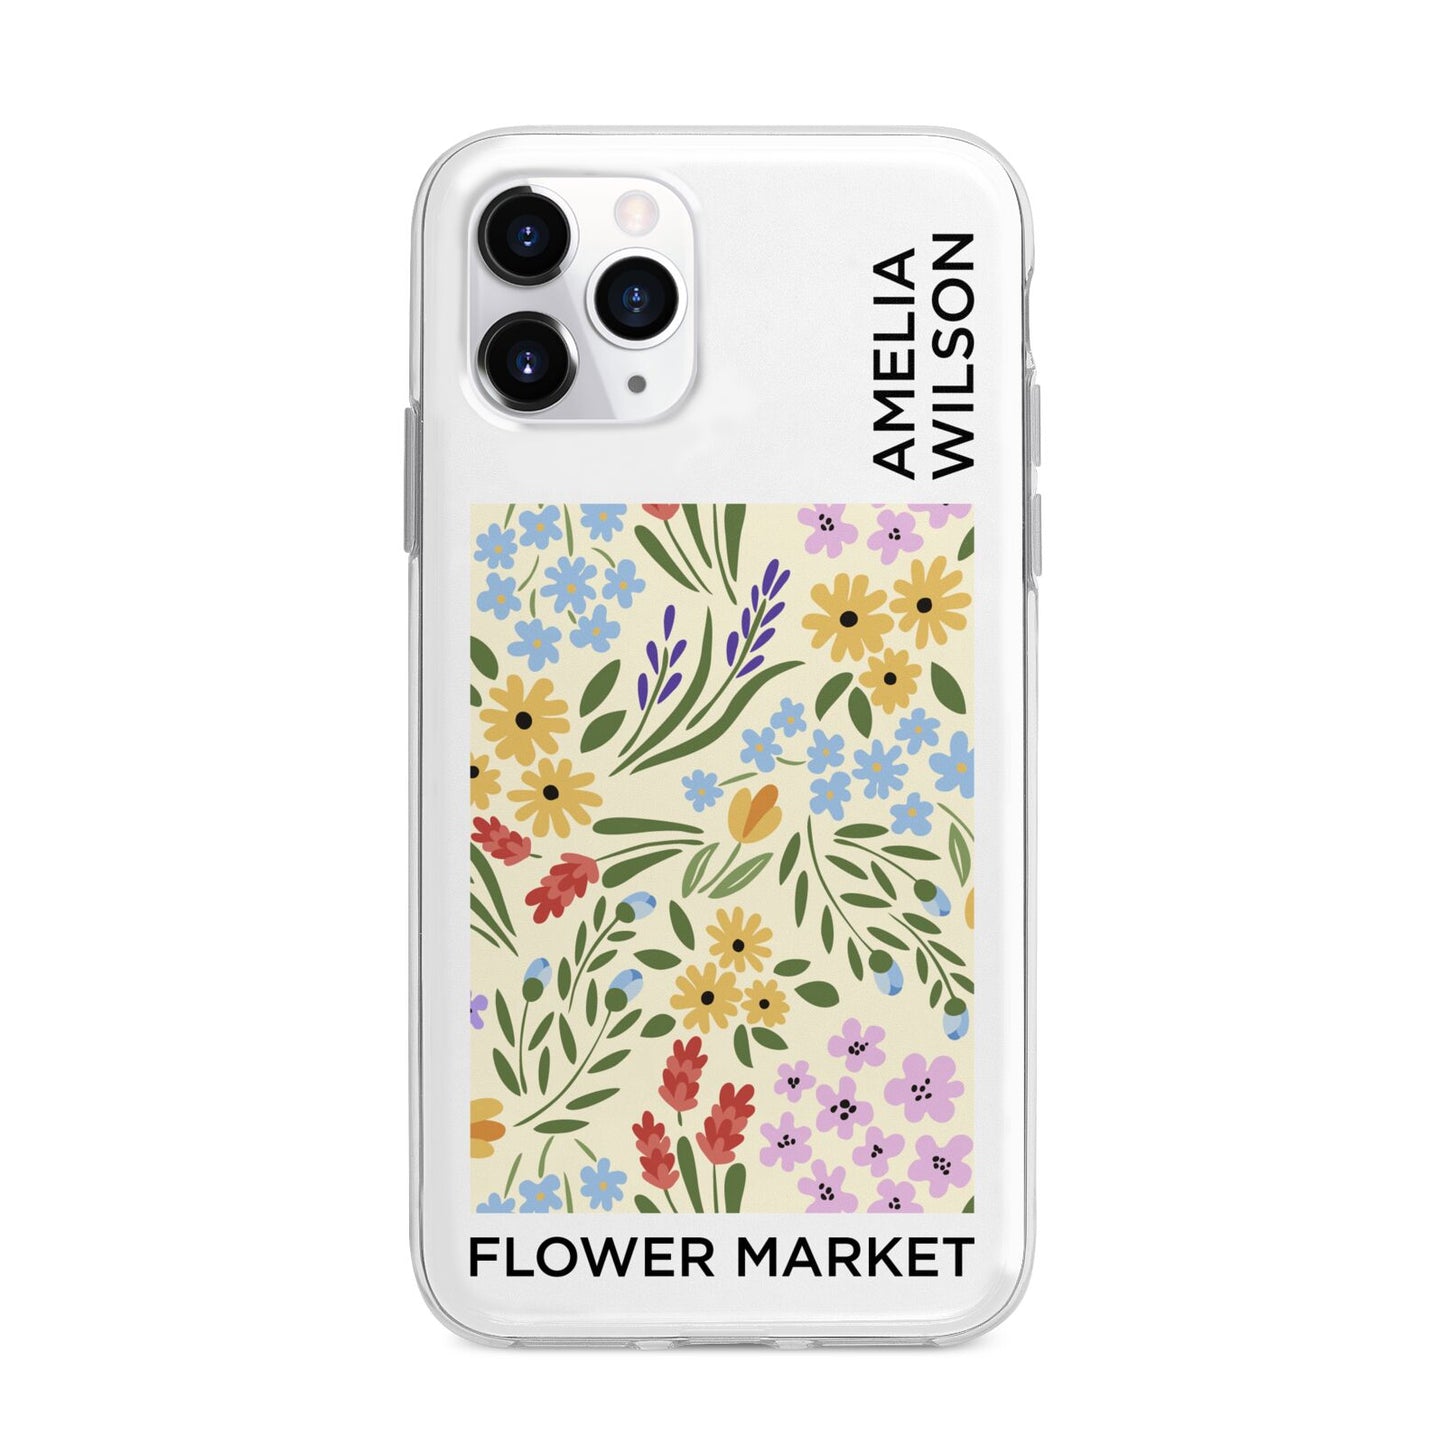 Paris Flower Market Apple iPhone 11 Pro Max in Silver with Bumper Case